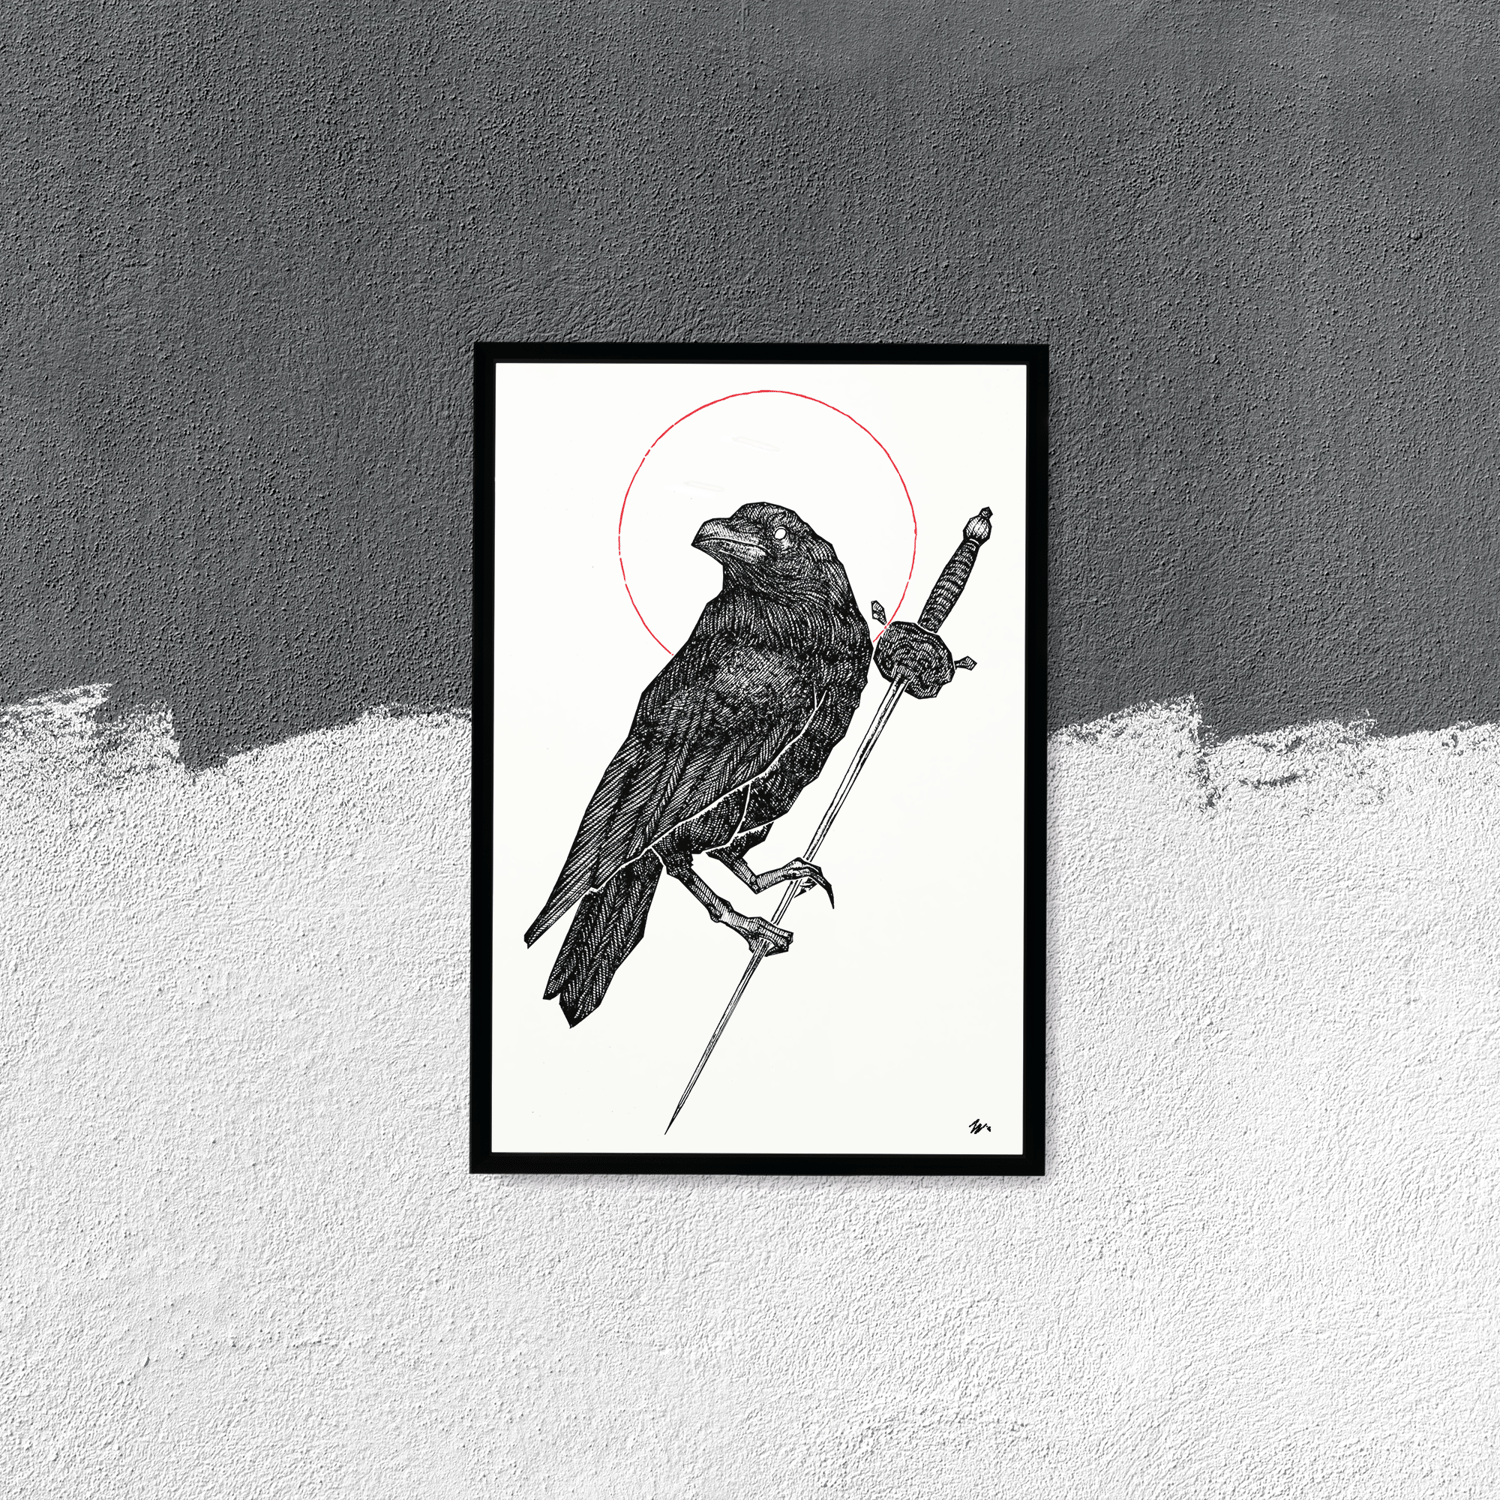 Image of "The Raven" 13"x19" Luster Paper Art Print